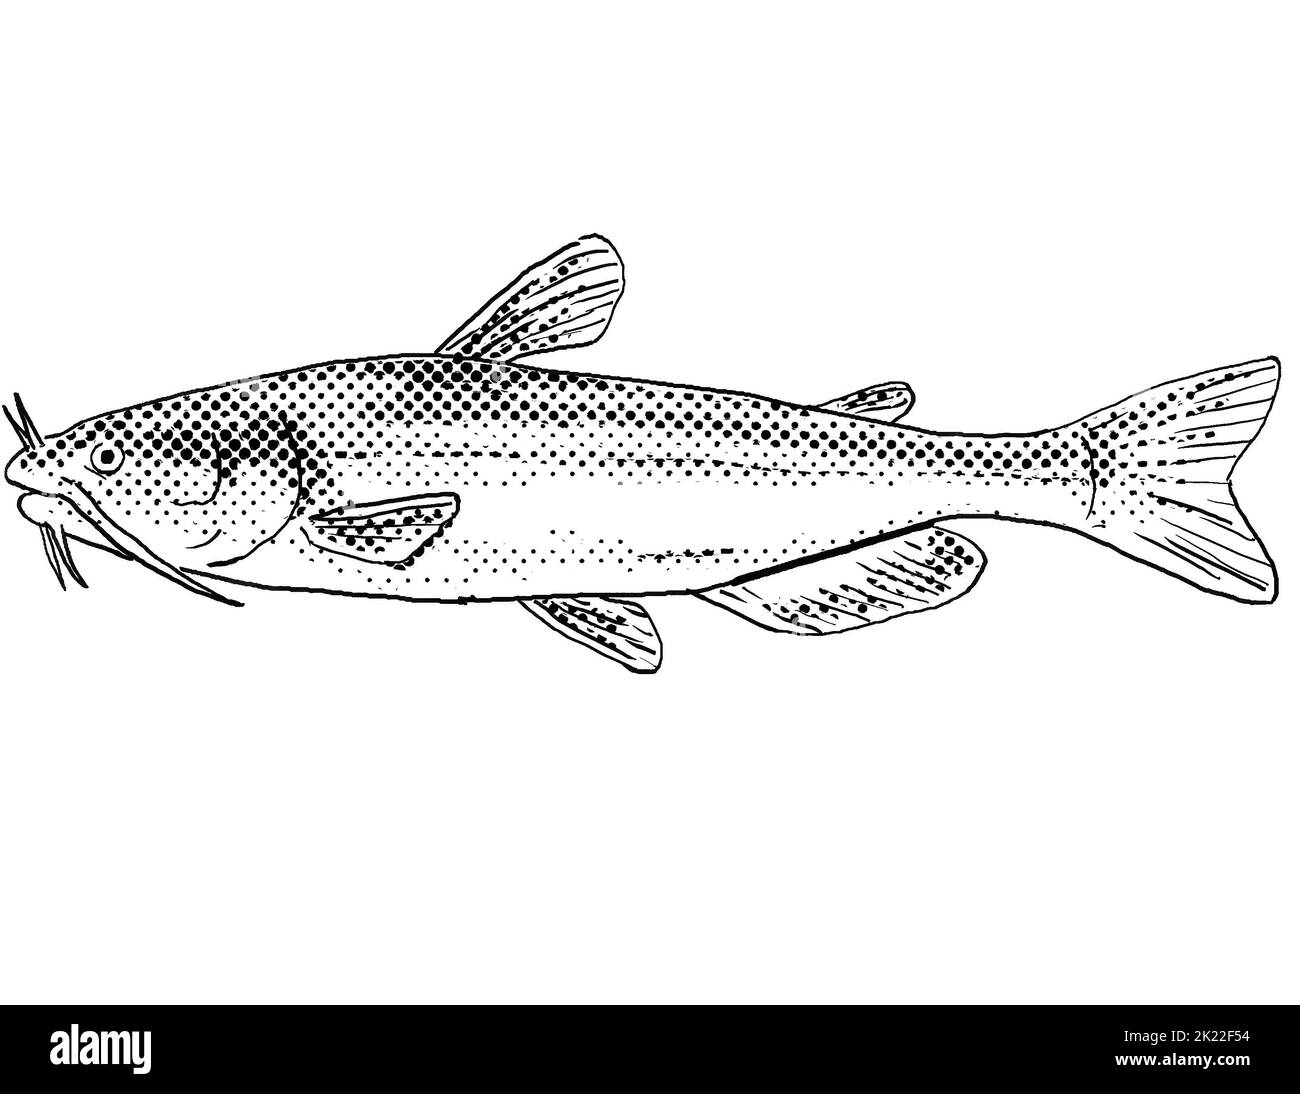 Cartoon style line drawing of a white bullhead Ameiurus catus or white catfish a freshwater fish endemic to North America with halftone dots shading o Stock Photo